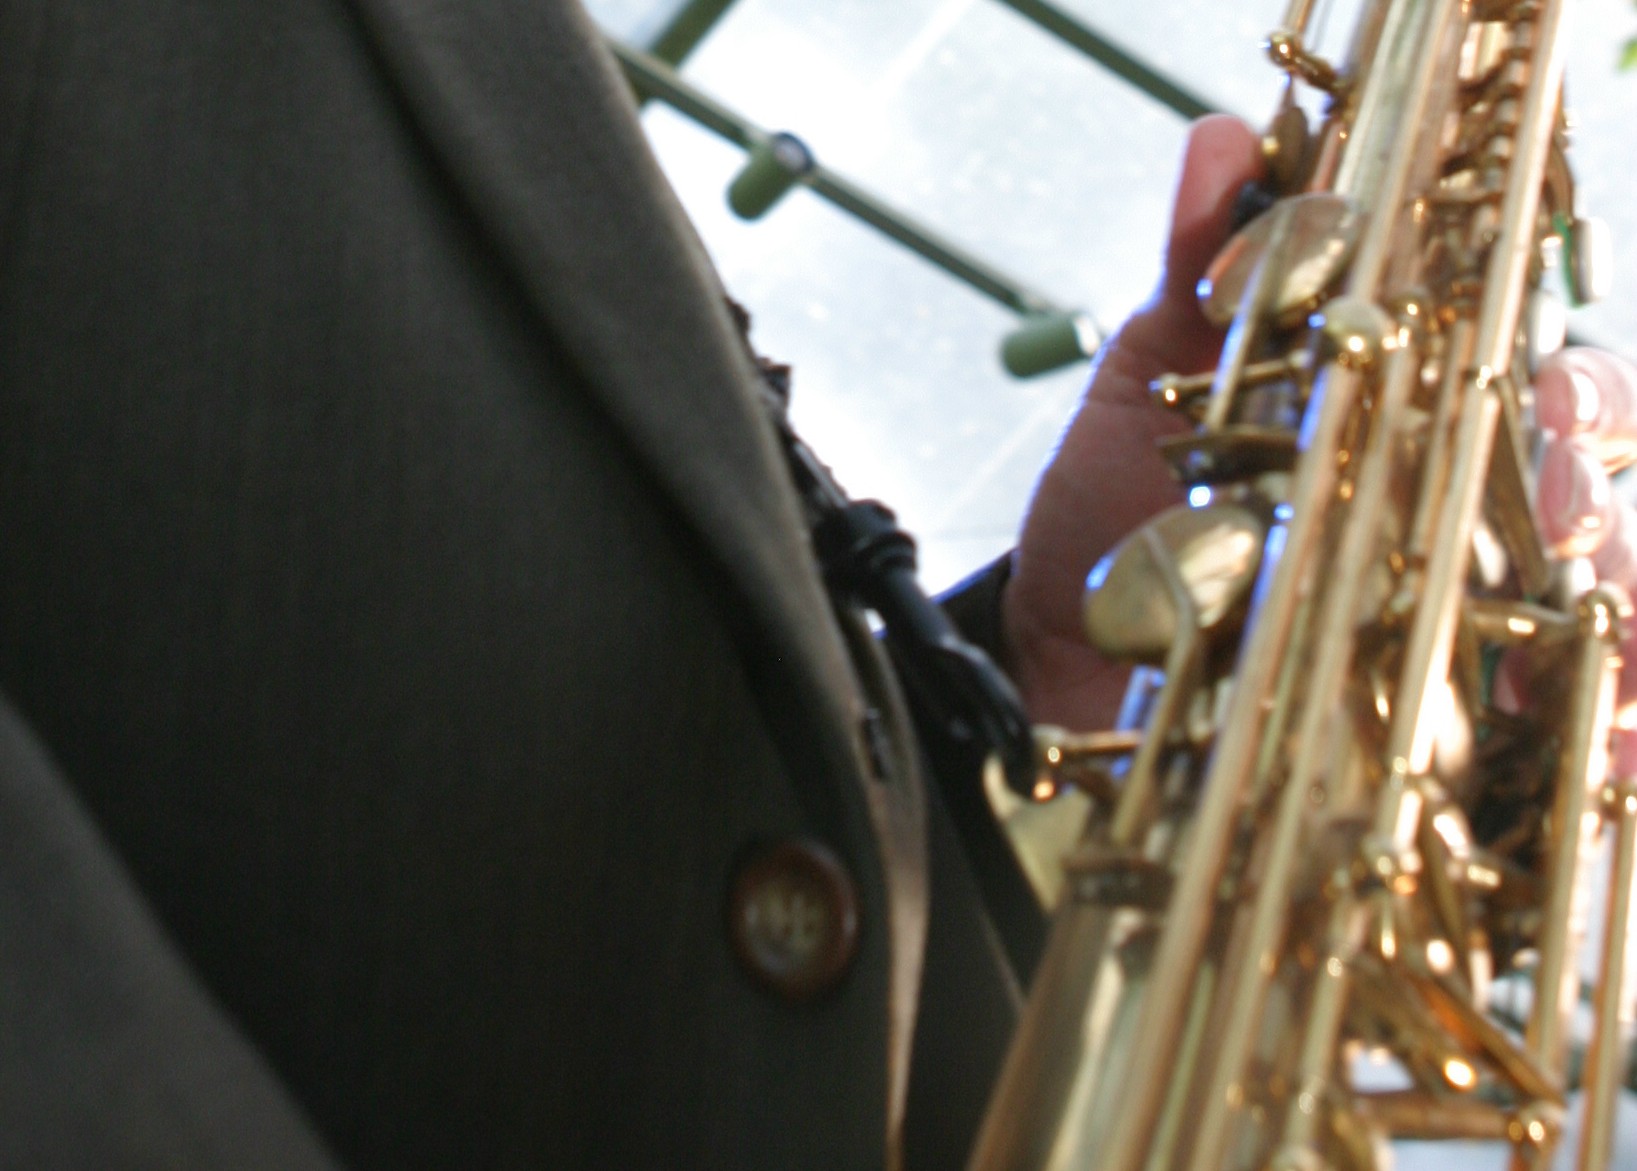    A close-up photo of person holding and playing saxophone.   